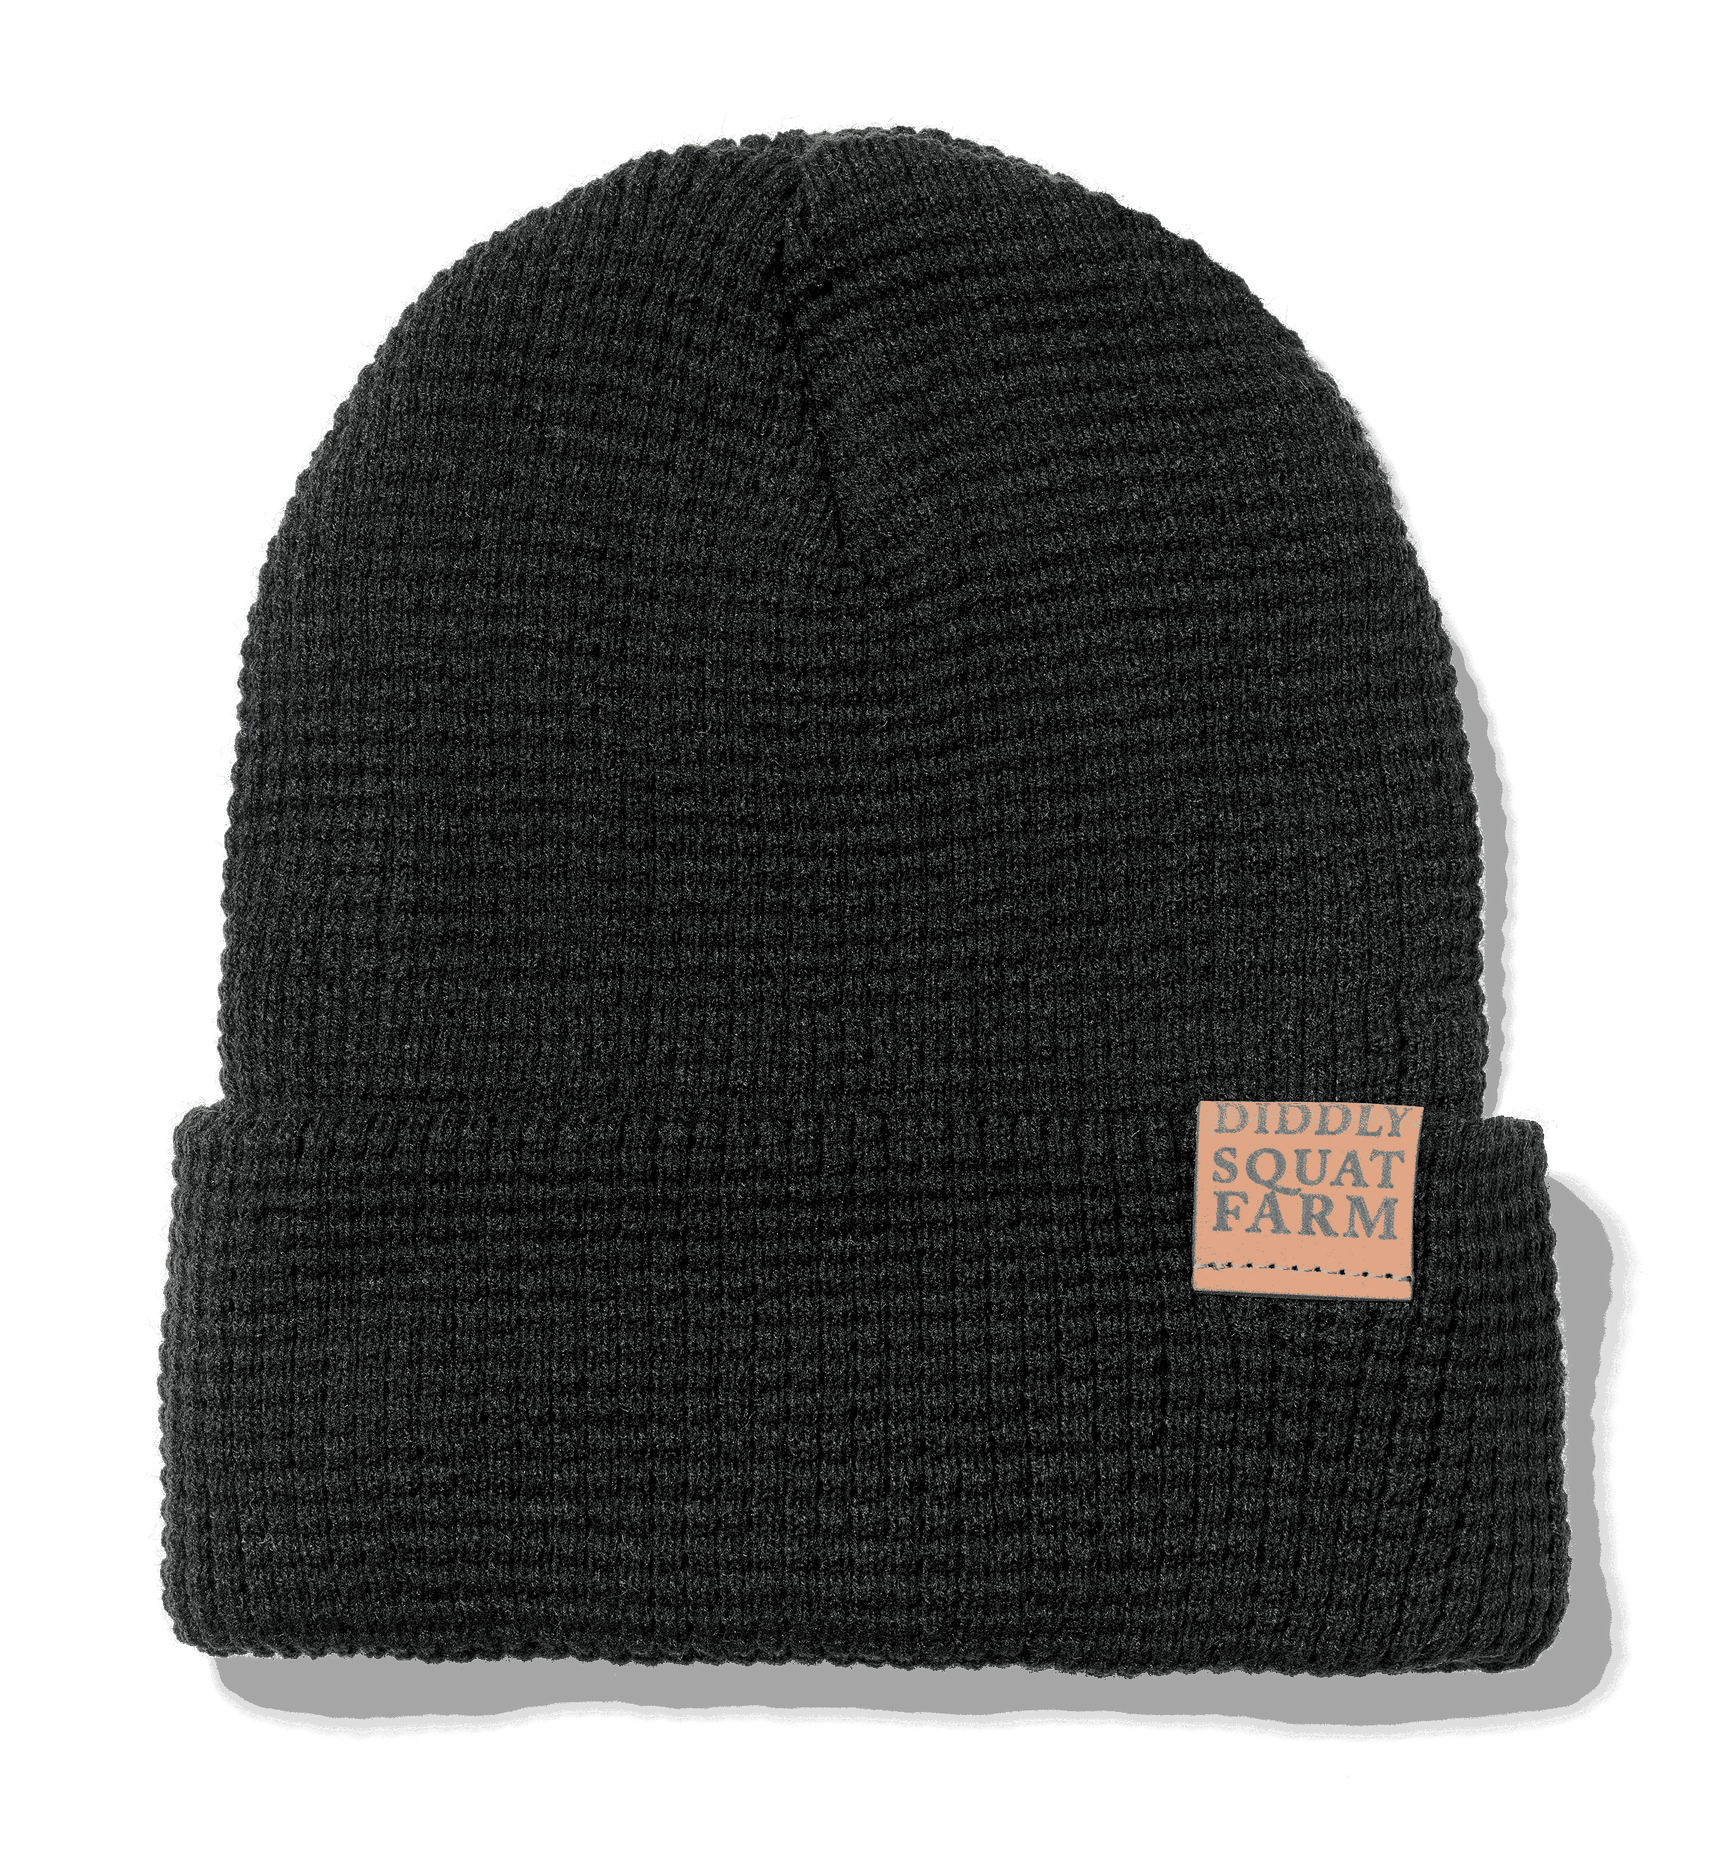 Diddly Squat Soft Knit Beanie